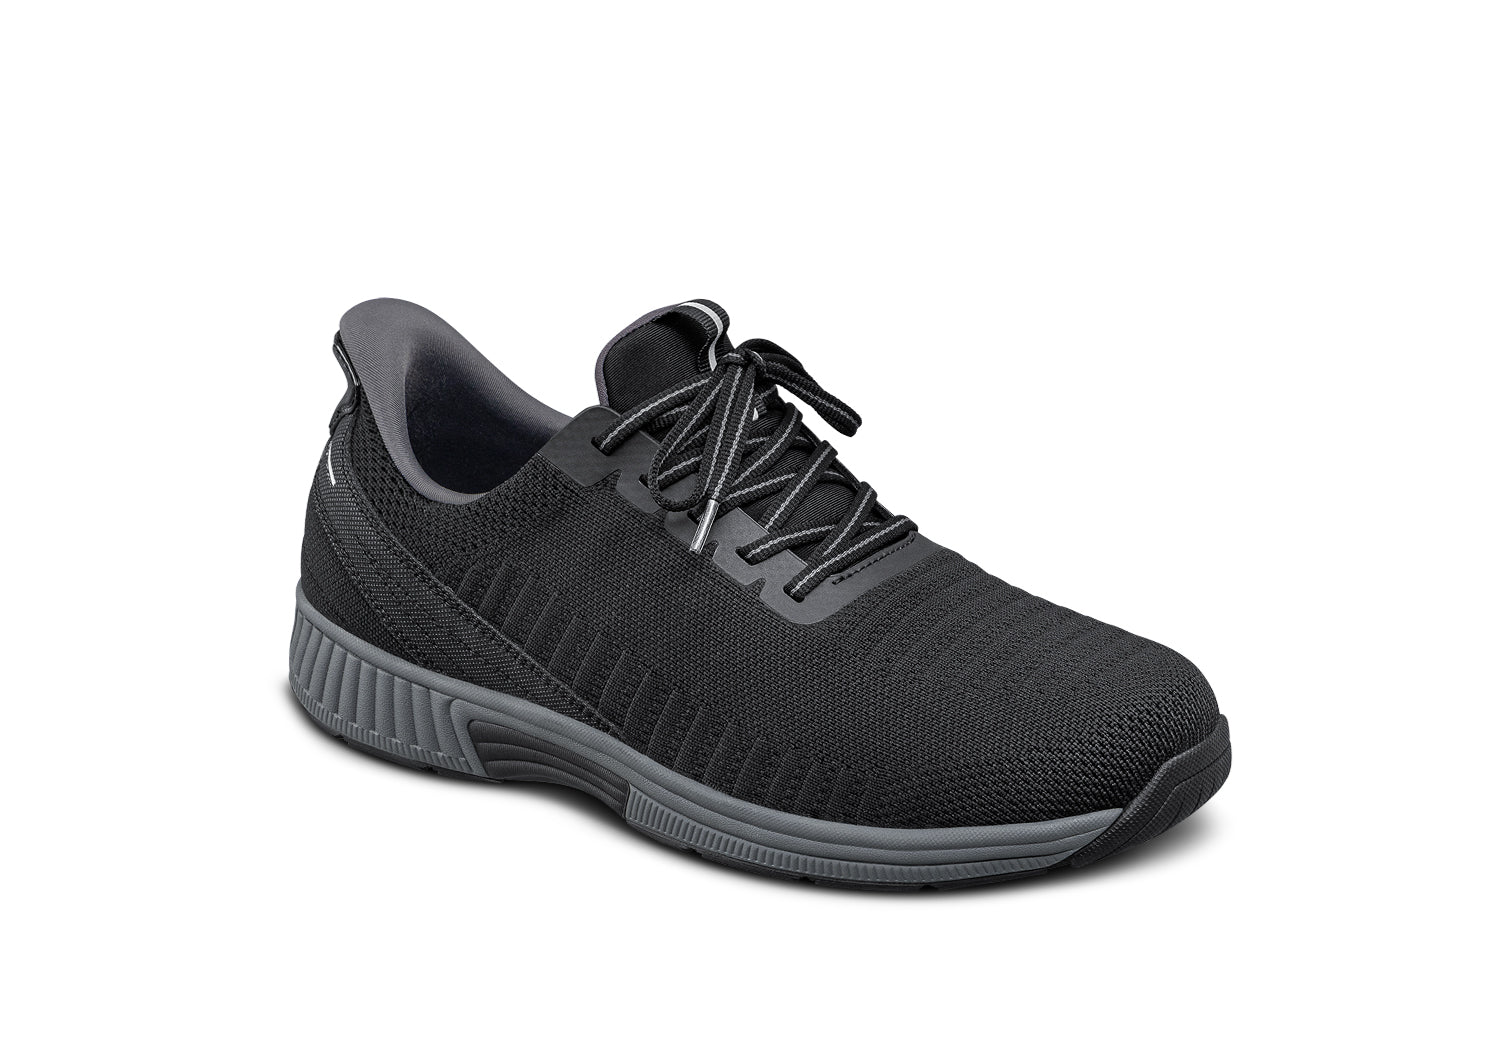 On The Run, Athletic & Comfort Shoes, Orthotic Supports